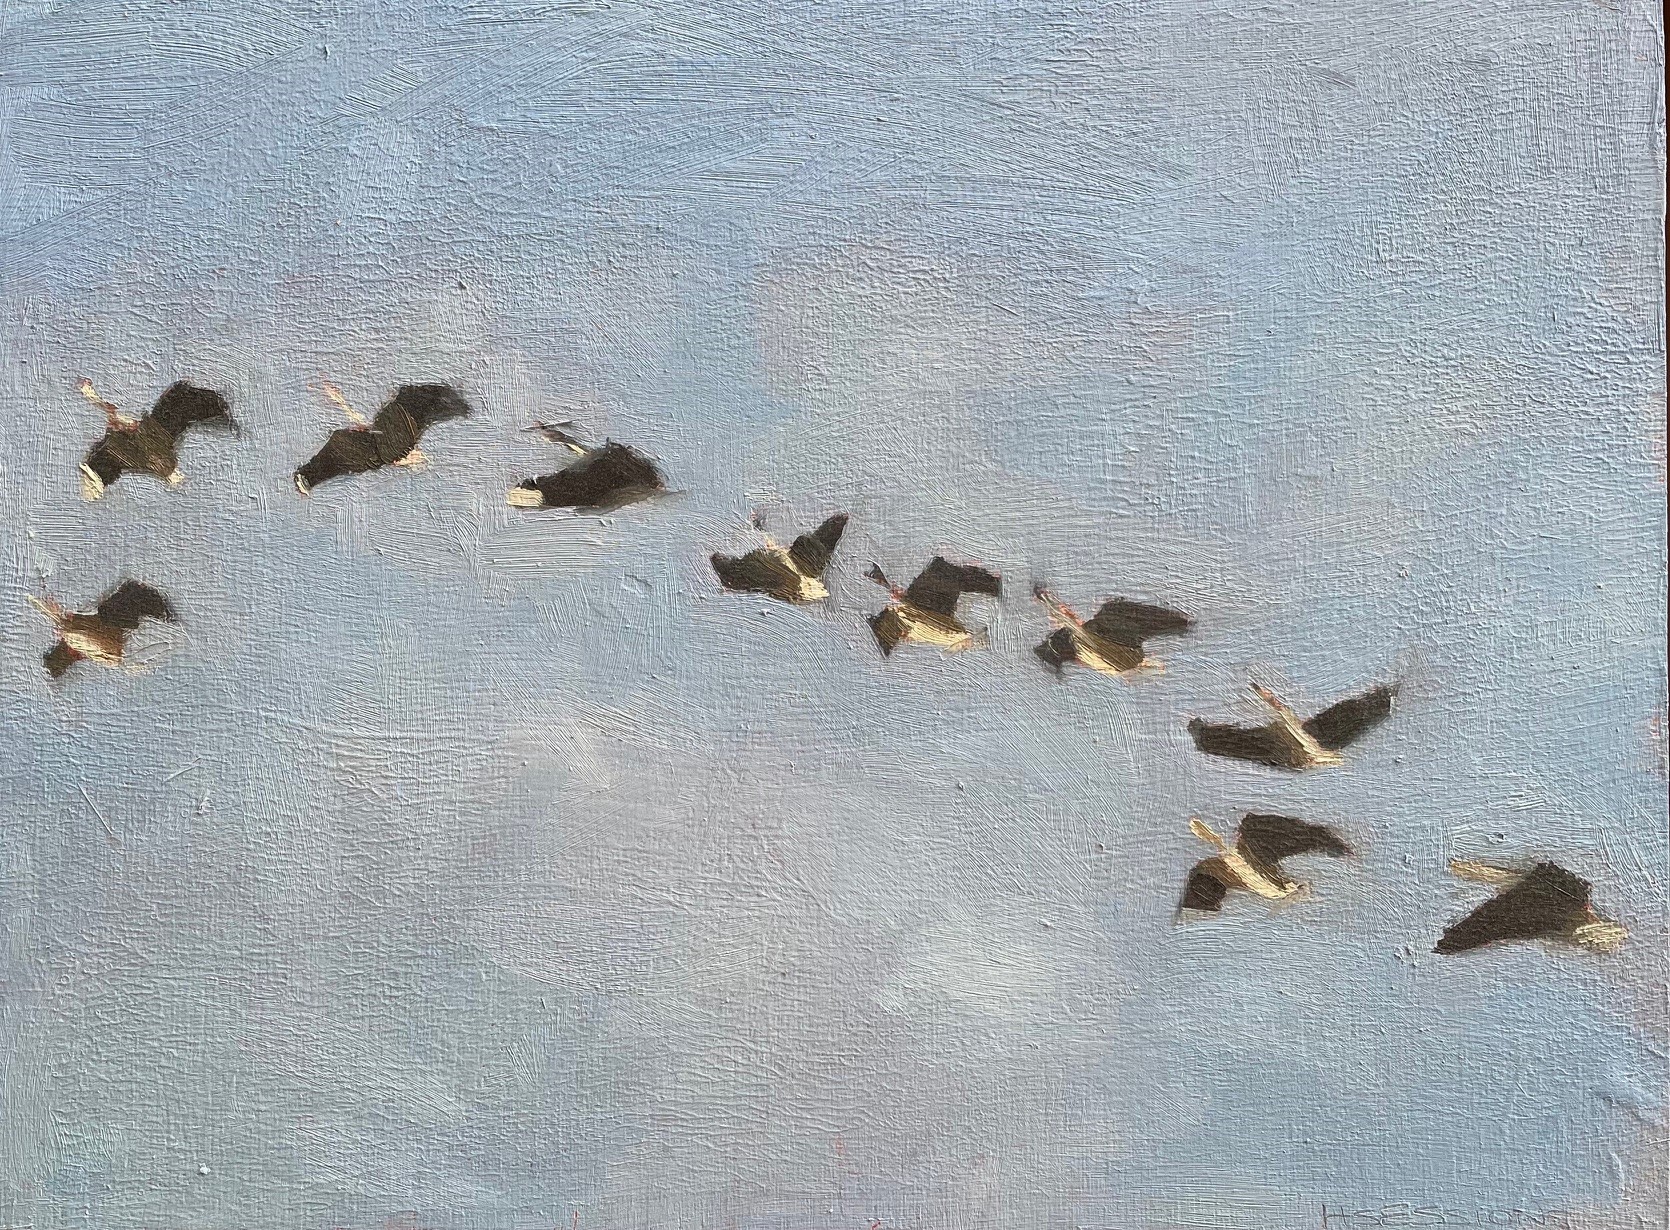 Geese Migration 2022 I